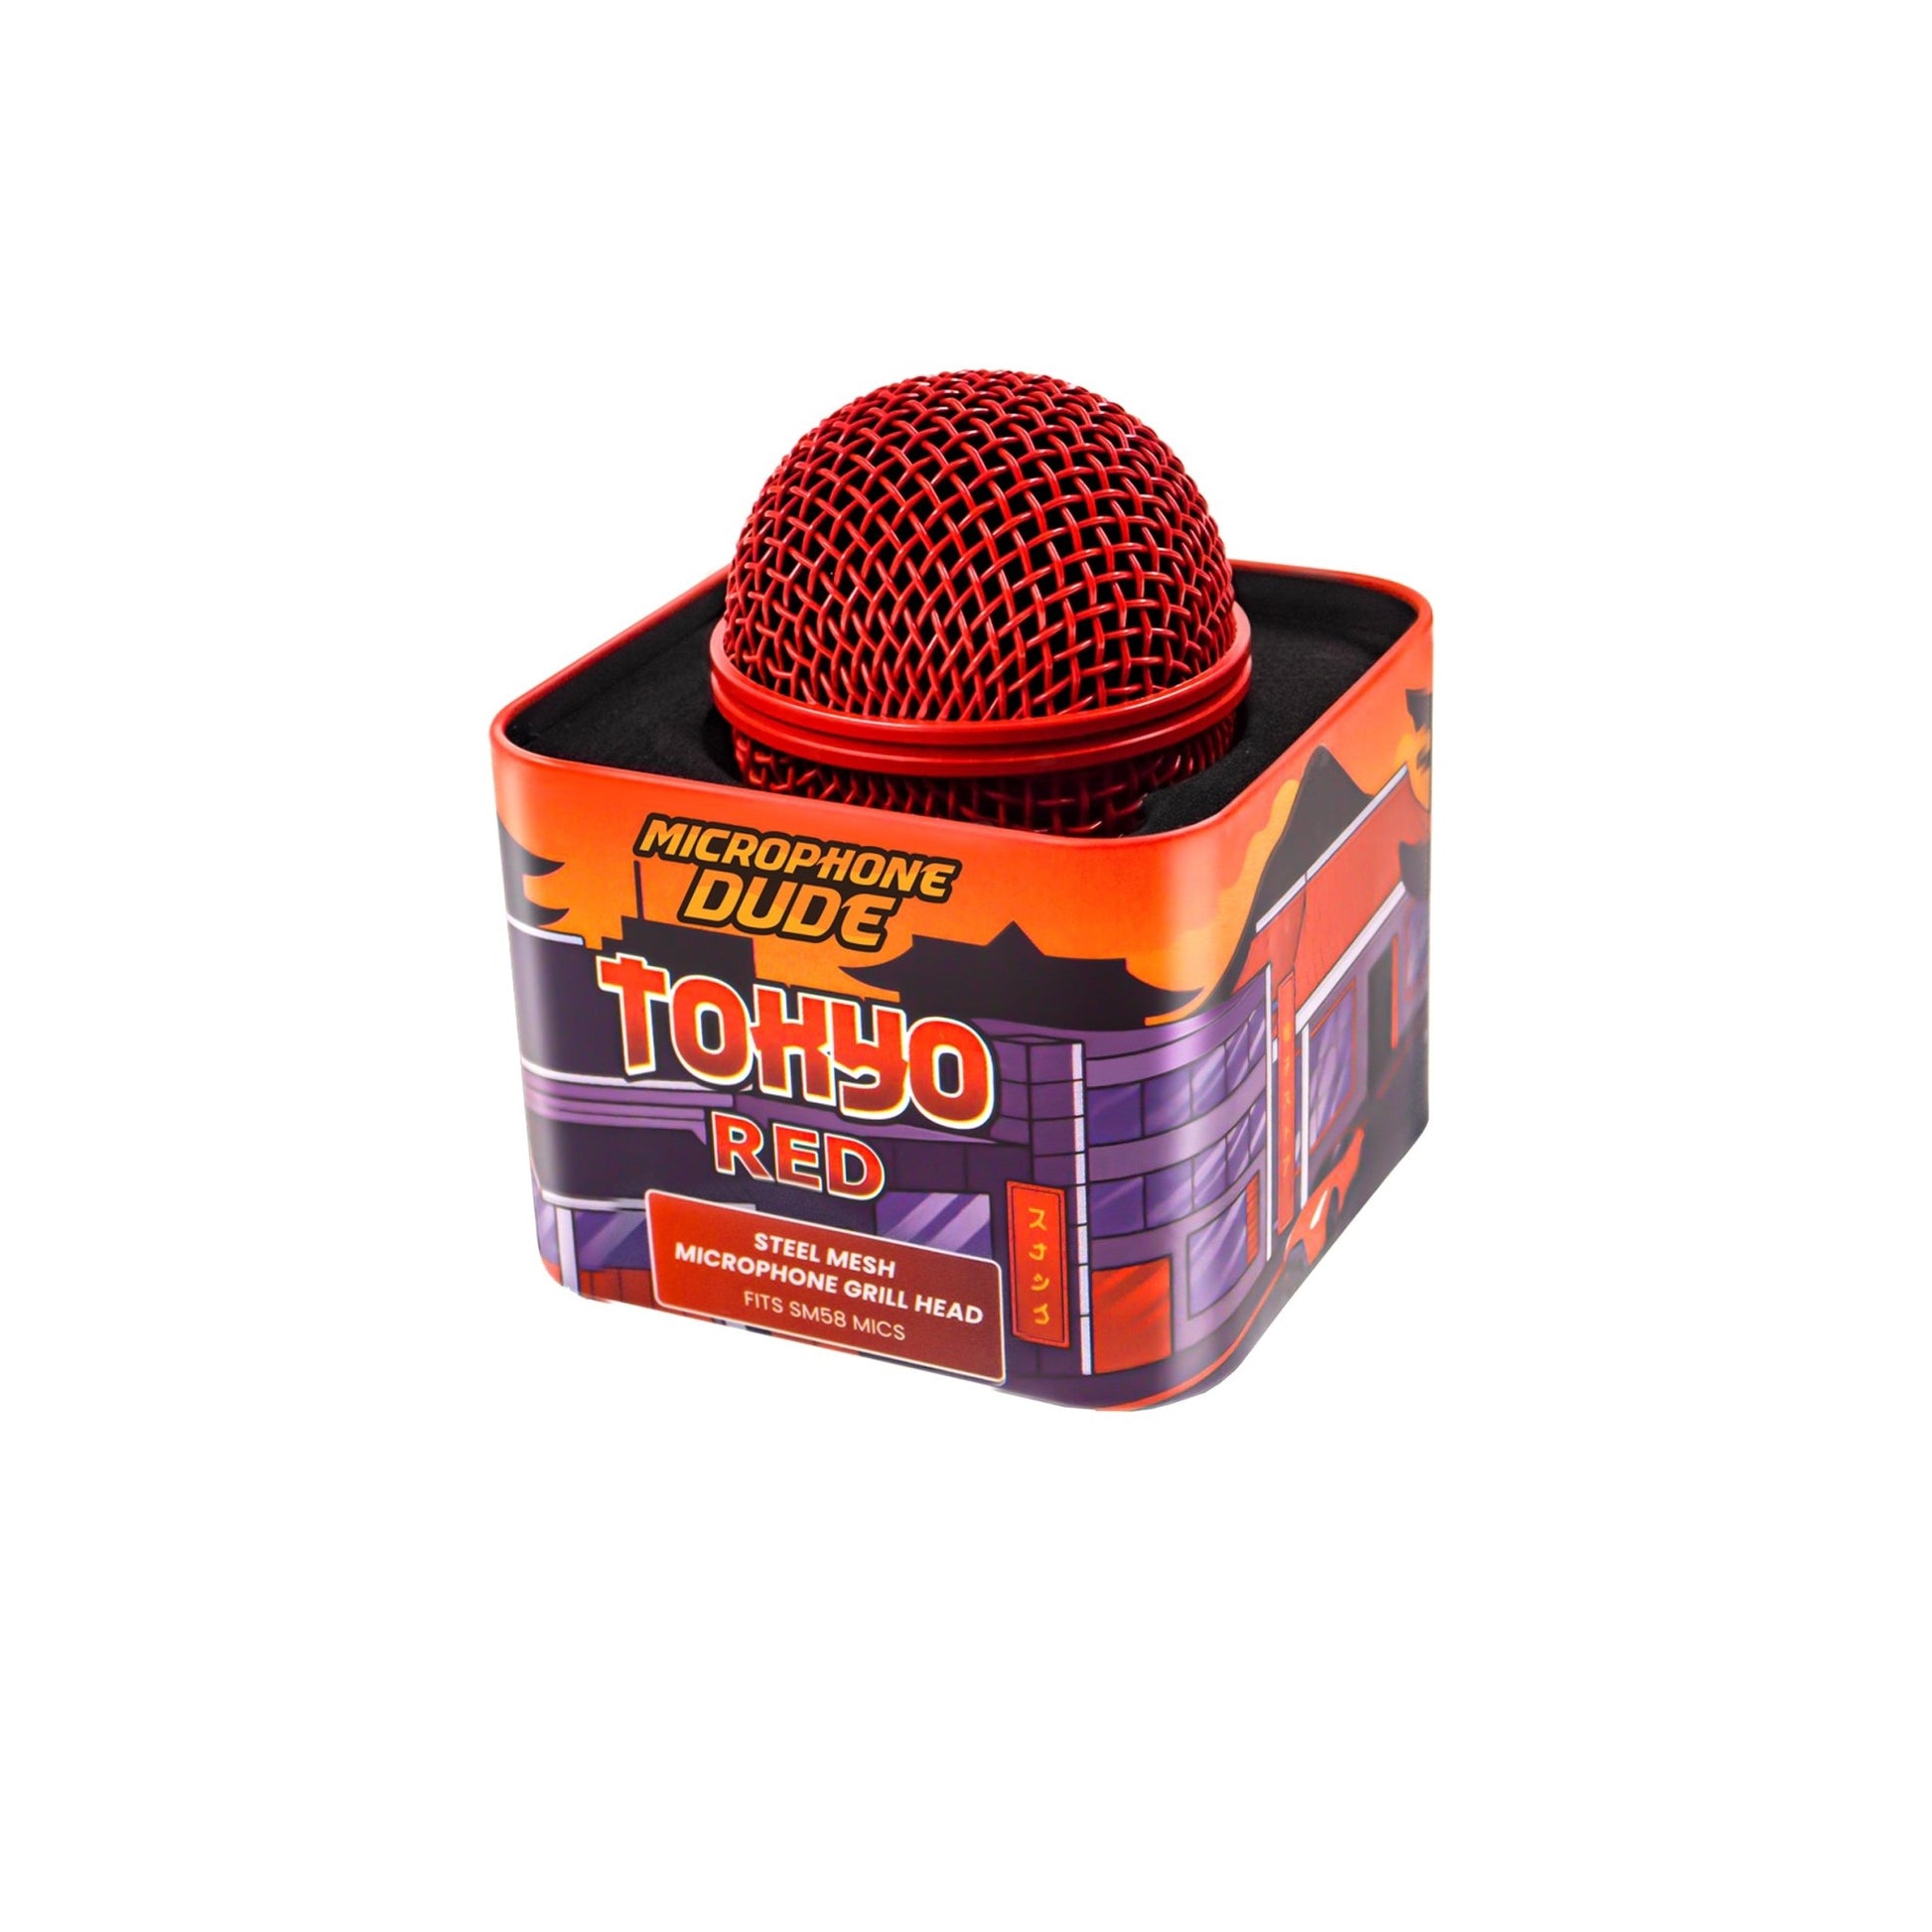 Tokyo Red - SM58 Replacement Microphone Grille - Microphone Dude